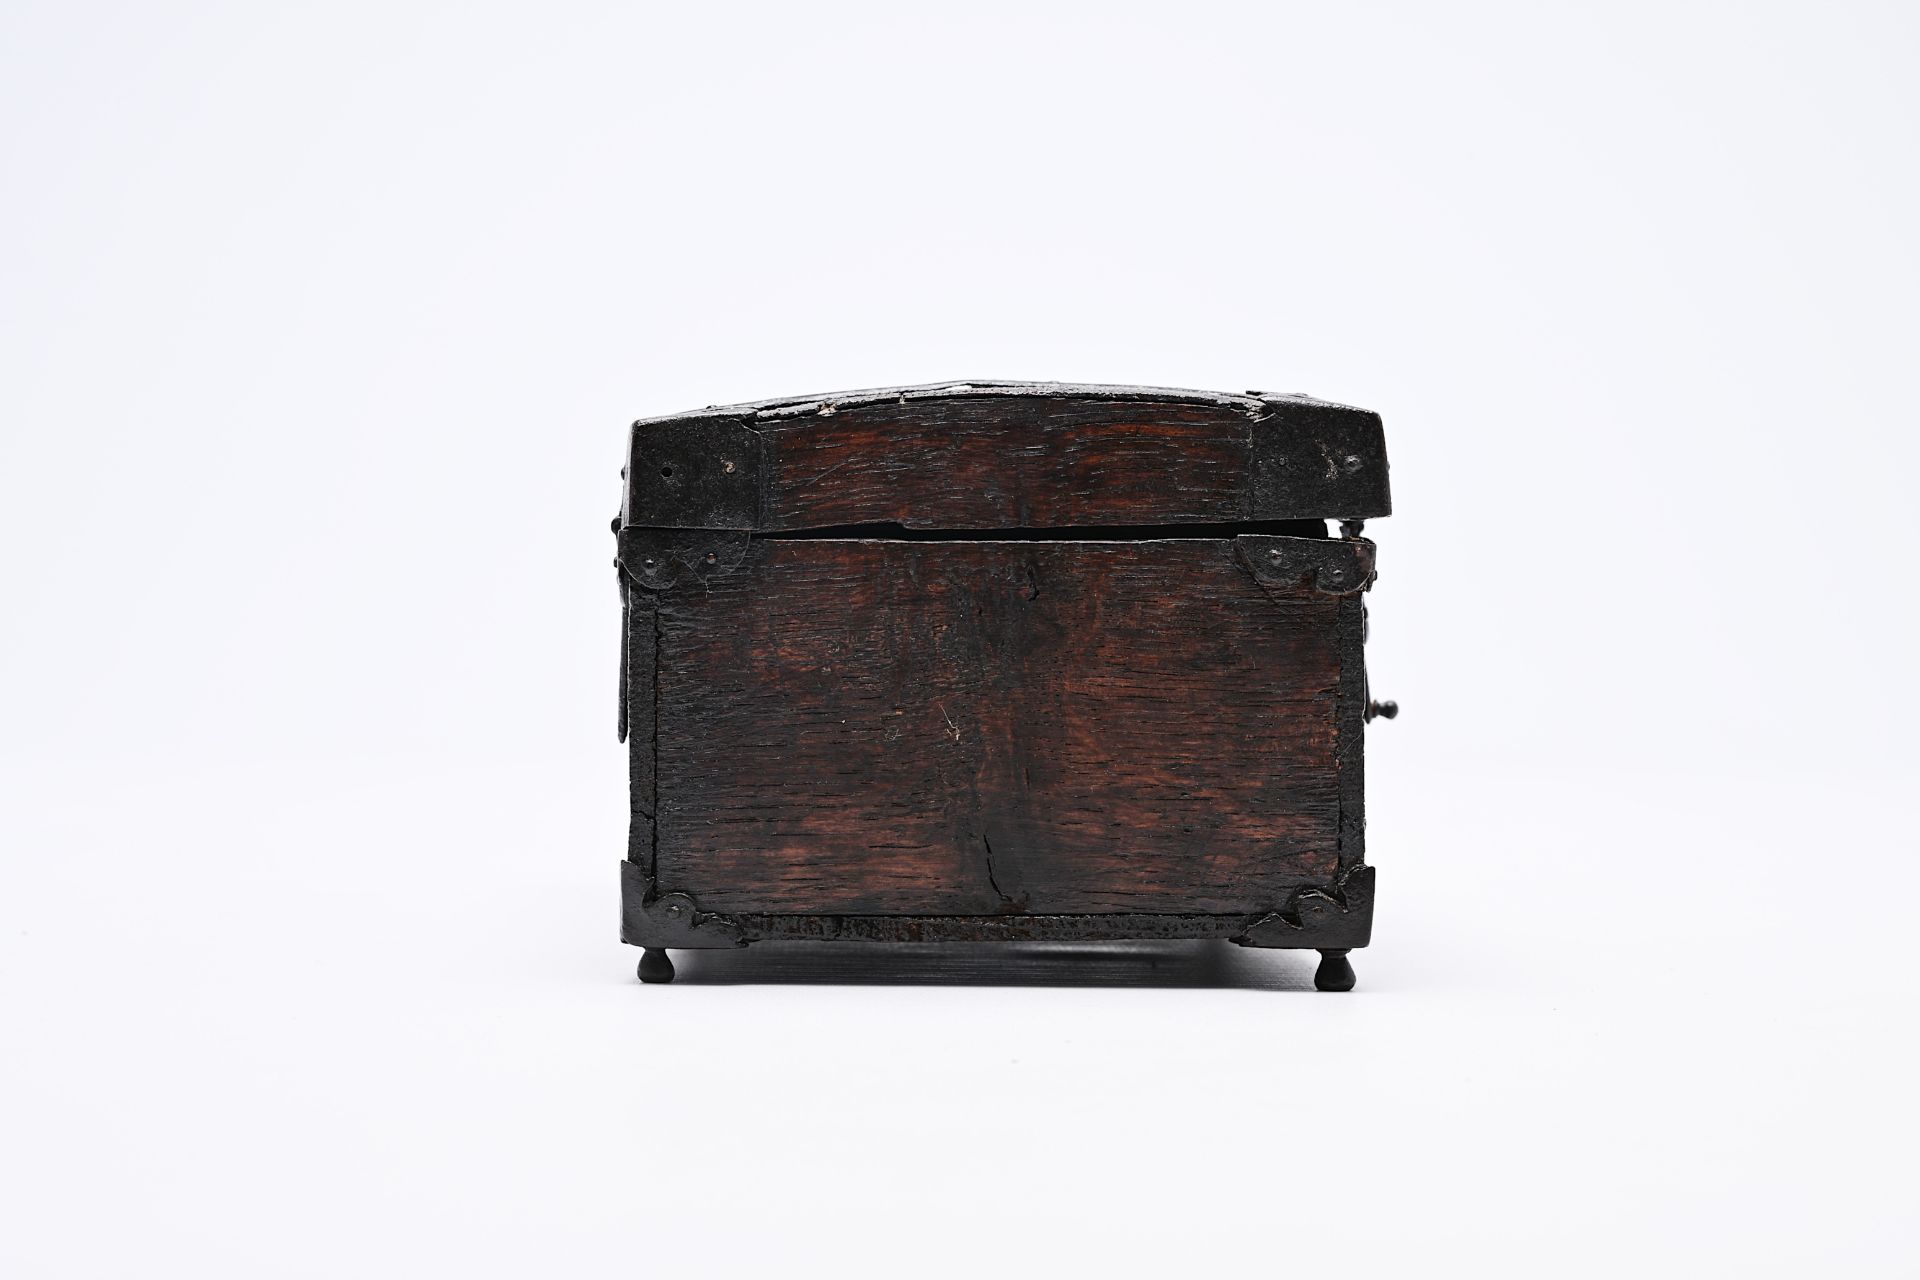 A wooden chest with iron mounts, Western Europe, 16th C. - Image 6 of 11